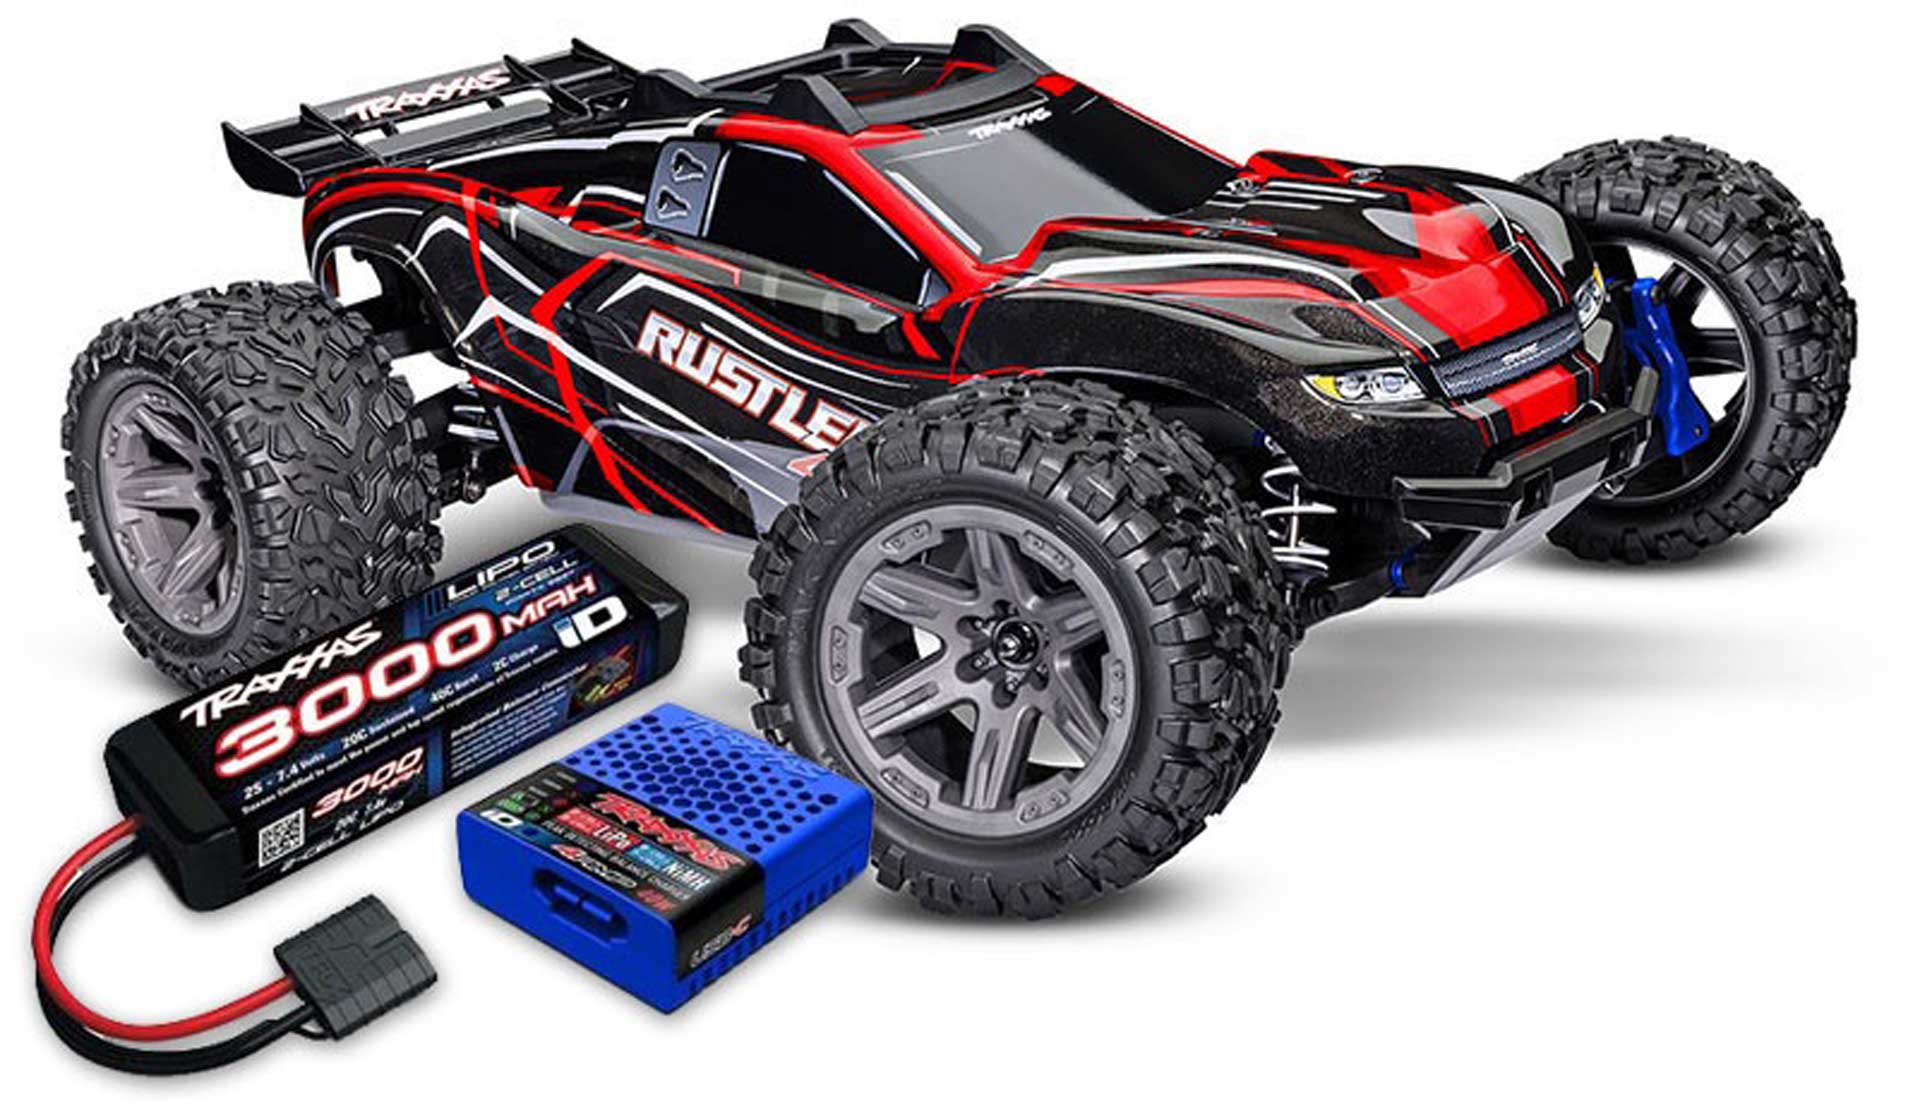 TRAXXAS RUSTLER 4X4 BL-2S RED 1/10 STADIUM-TRUCK RTR BL-2S SET WITH FREE LIPO BATTERY AND